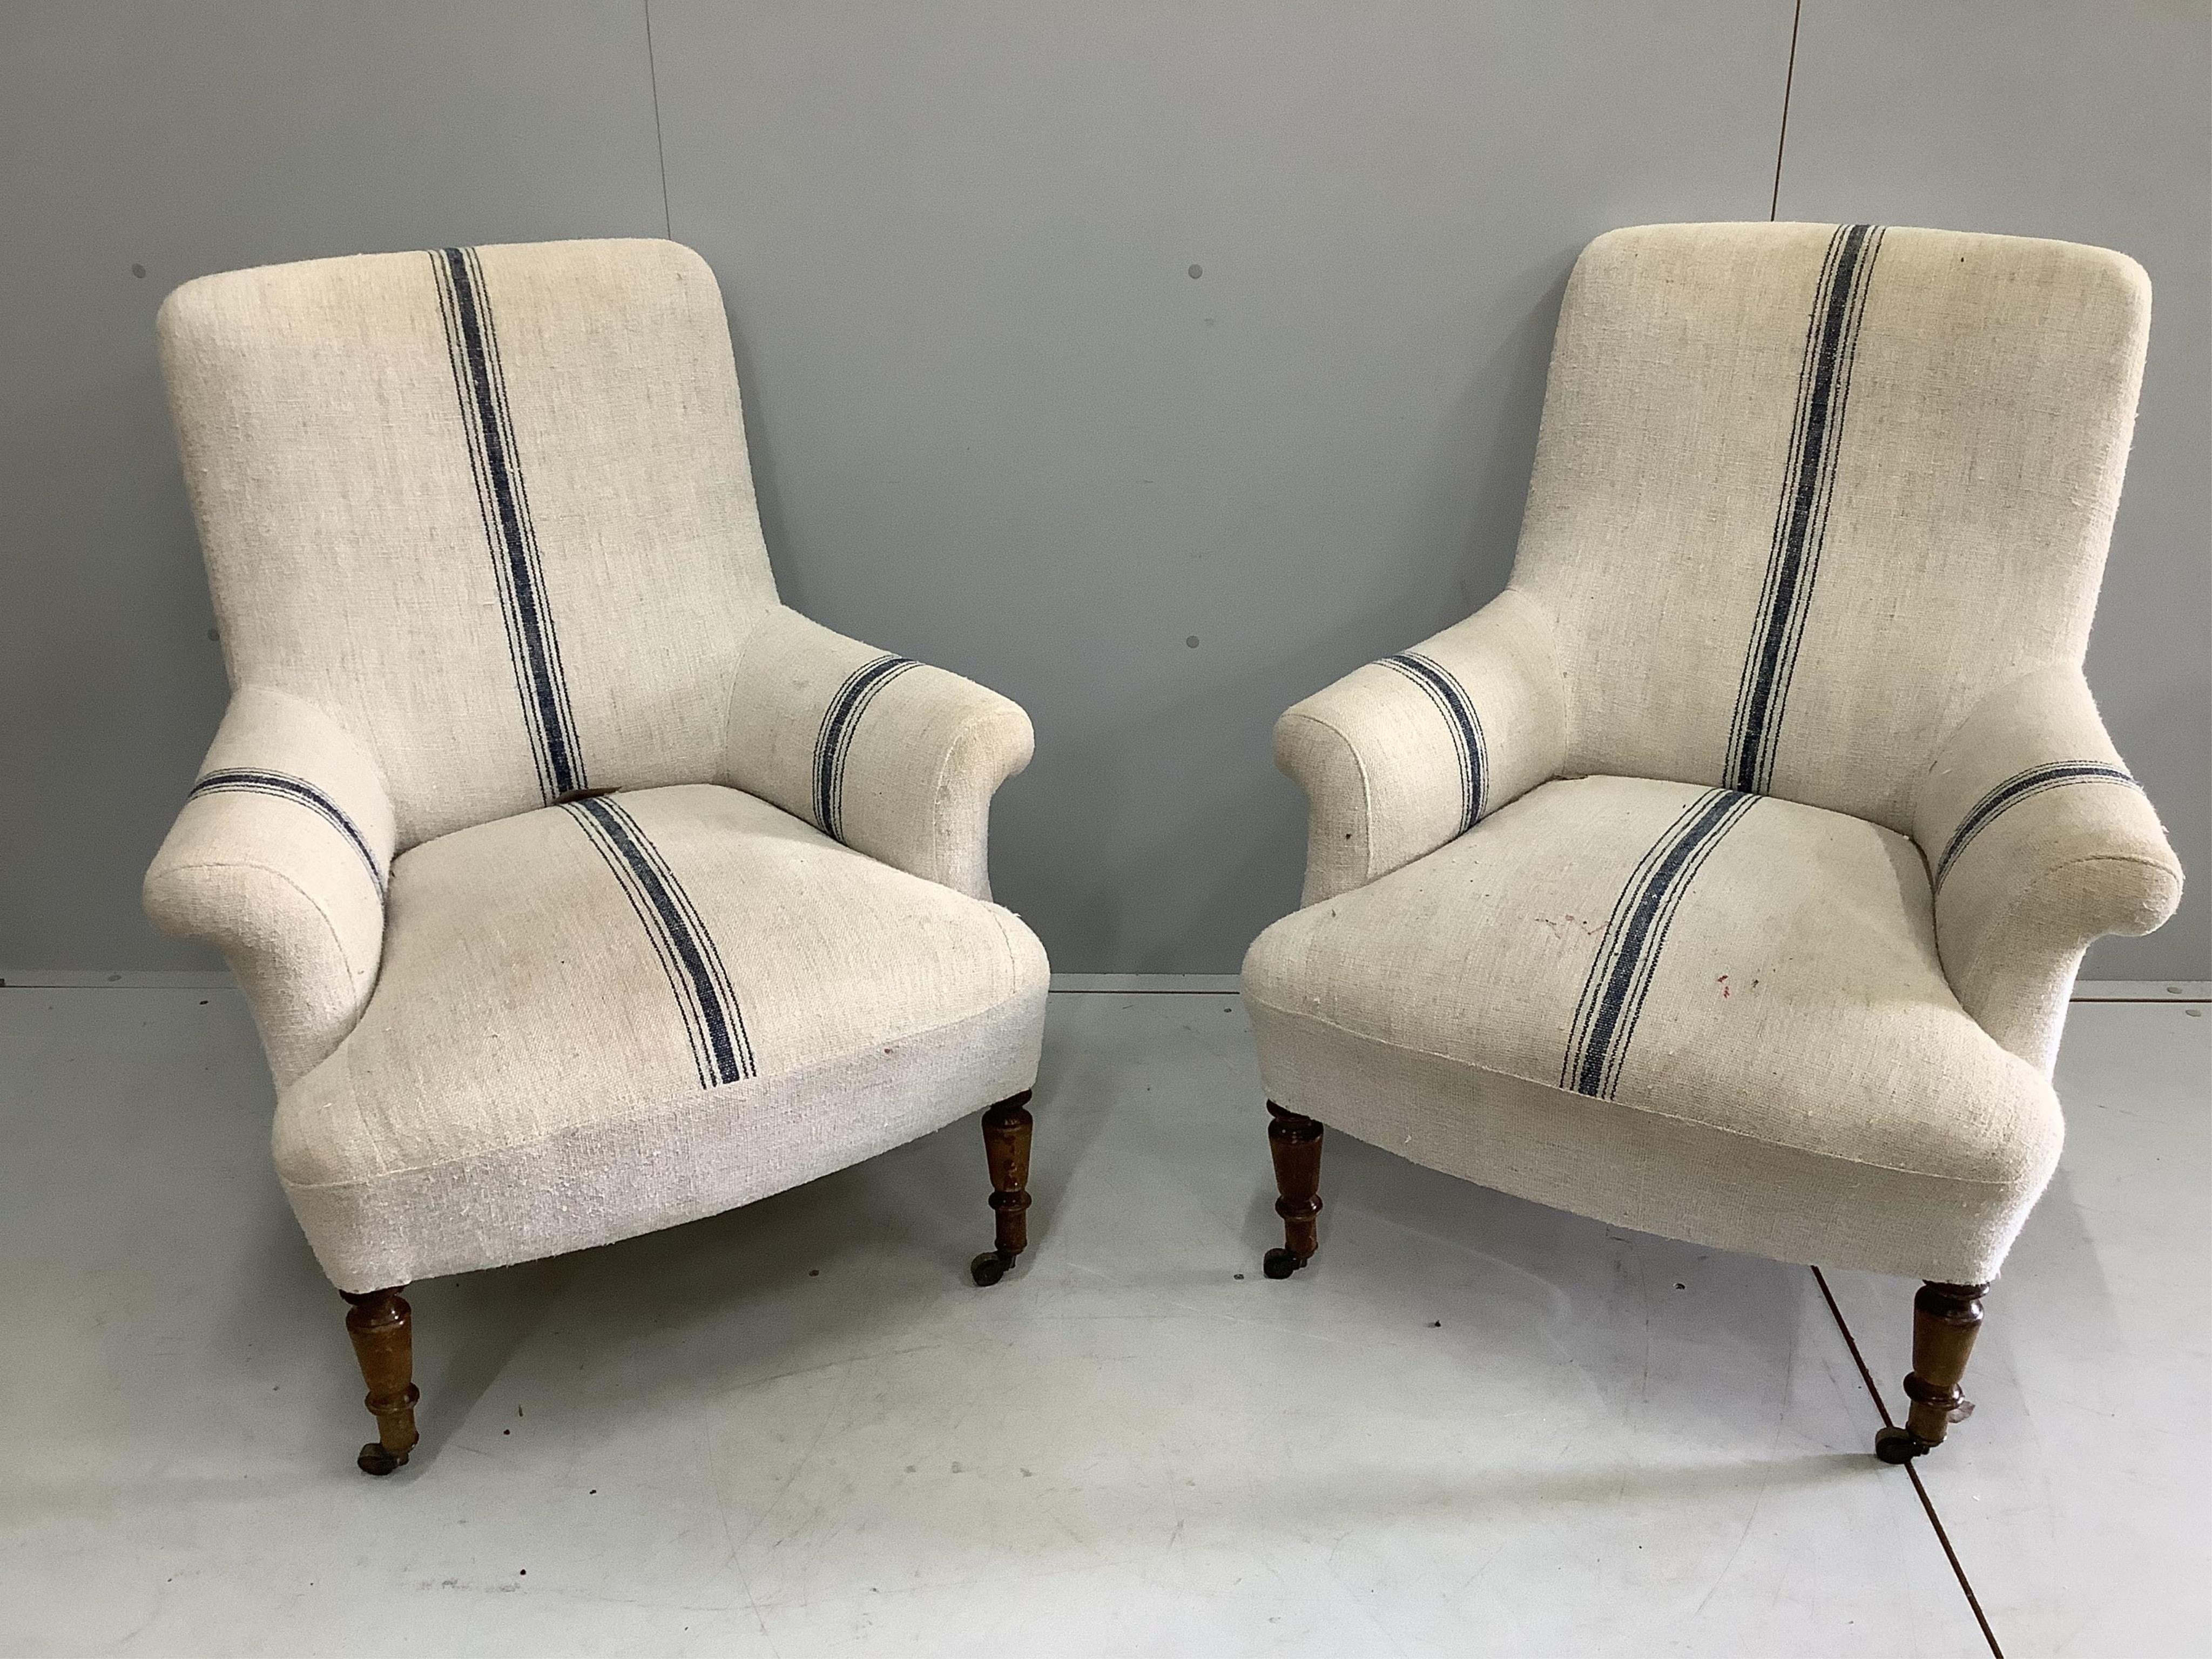 A pair of 19th century French armchairs, width 80cm, depth 70cm, height 92cm. Condition - fair